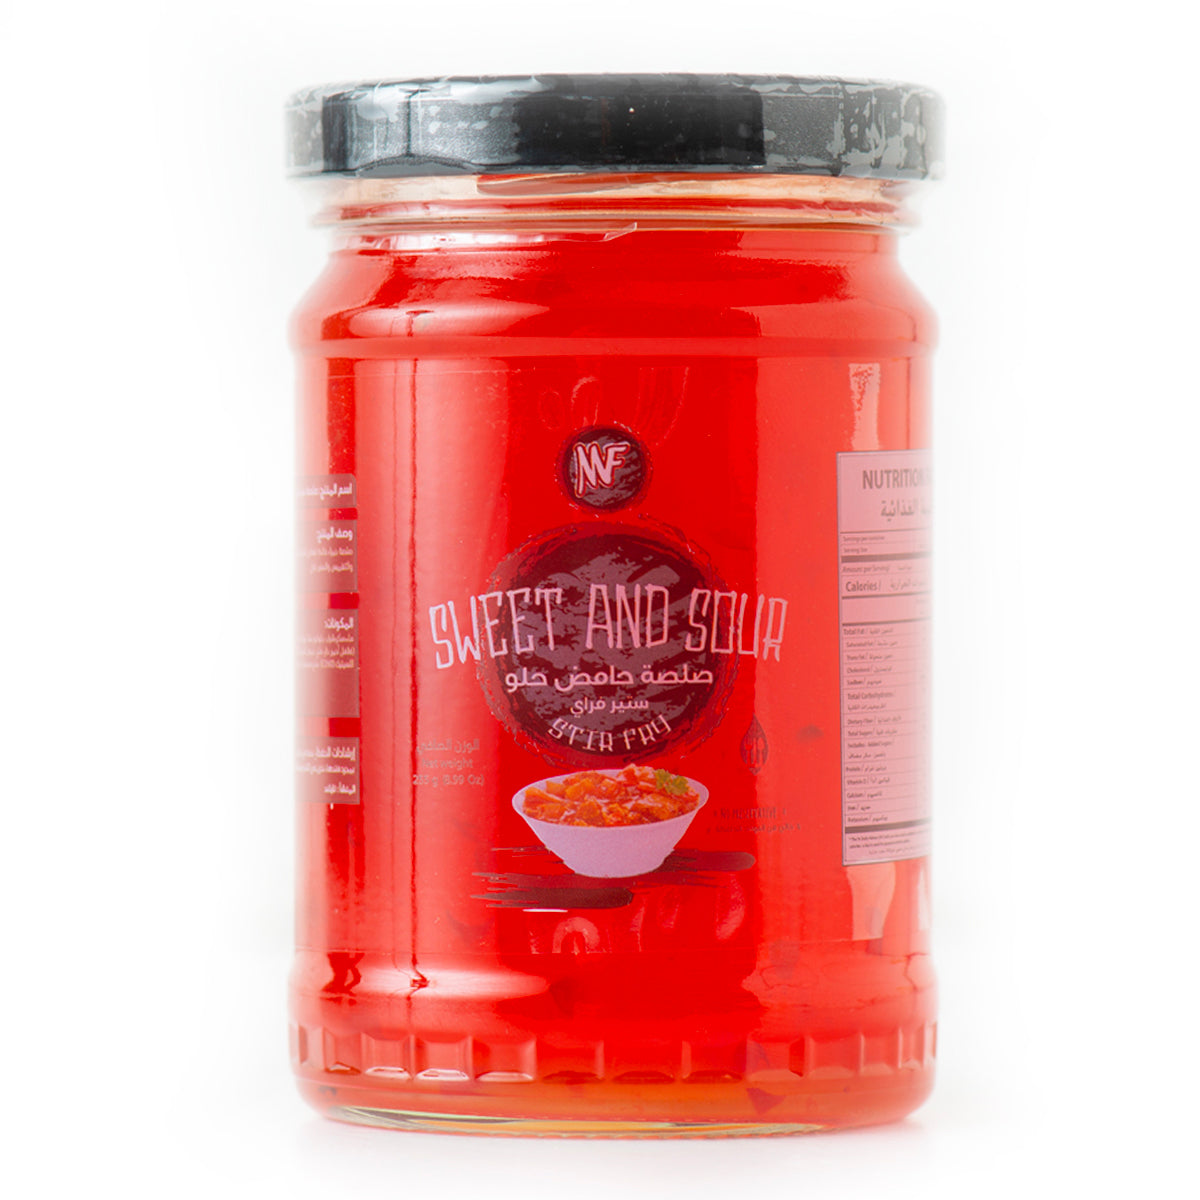 MF Sweet and Sour Stir Fry 255ml